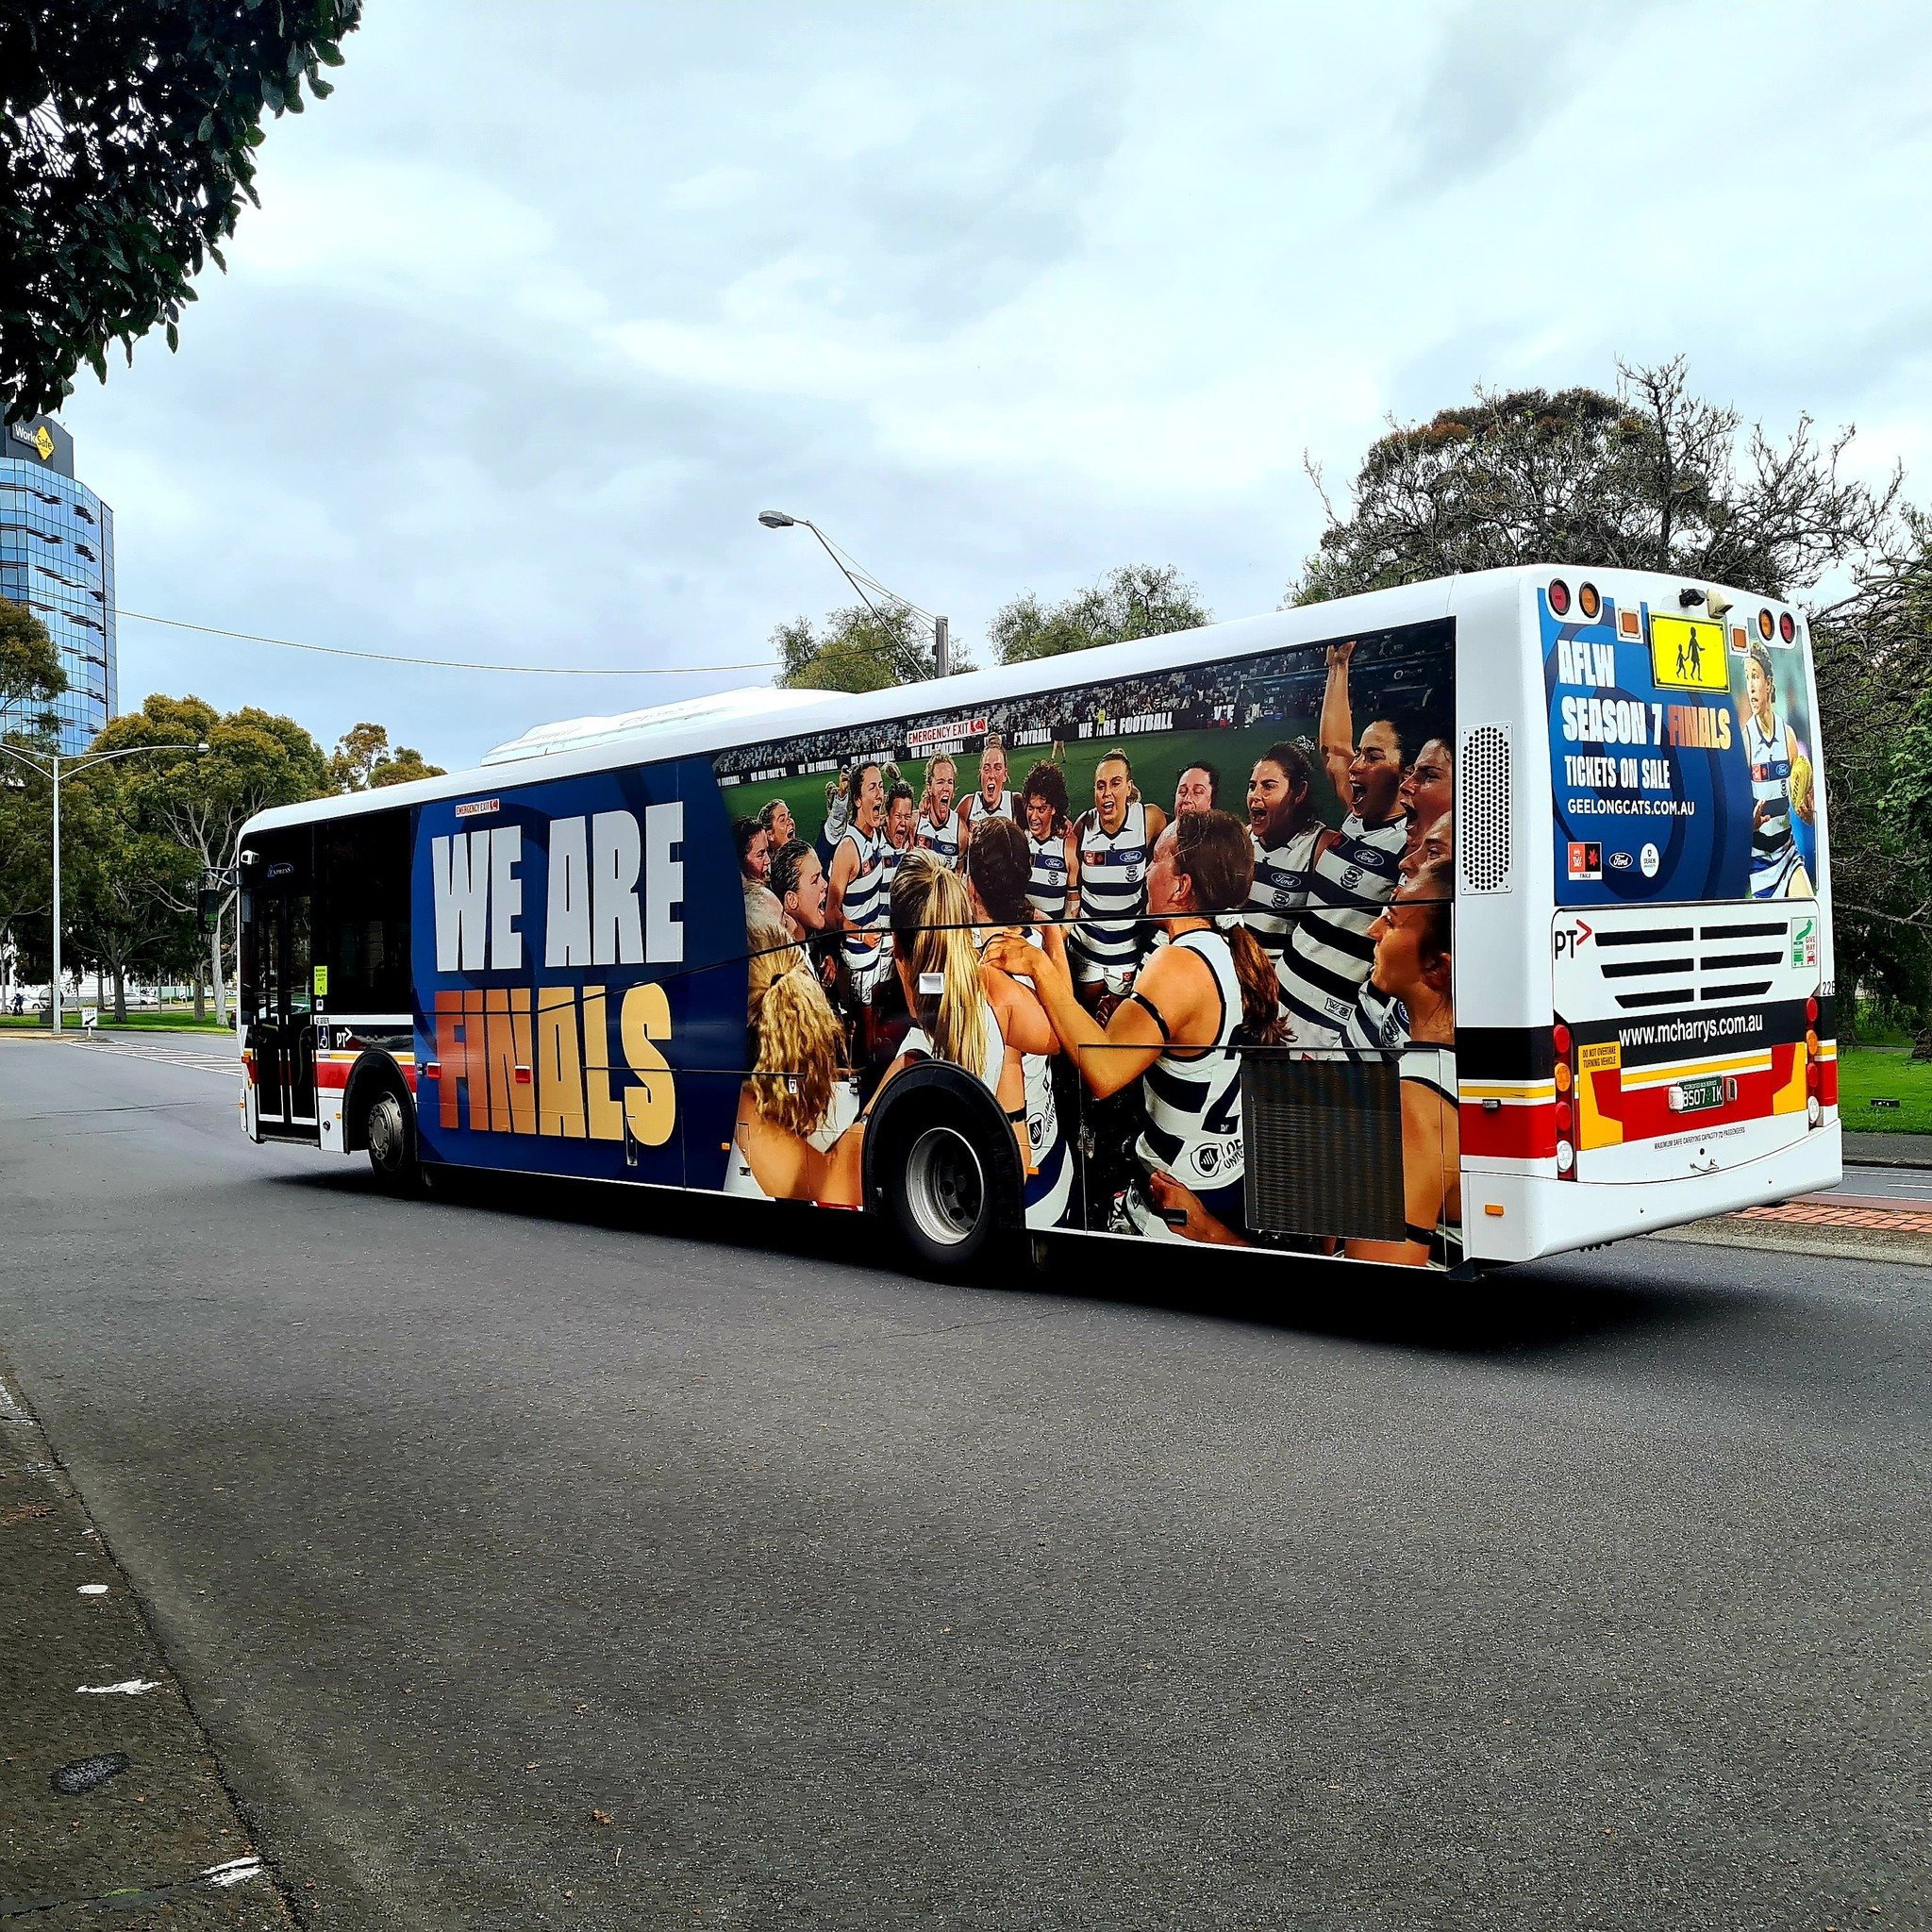 Brand new Advertising heading into the Finals for the Geelong Cats AFLW team! An unfortunate end to their Elimination Final will mean we see the team again in 2023.

How good does the signage look on the road!
@geelongcats 
 
#busadvertising #transit